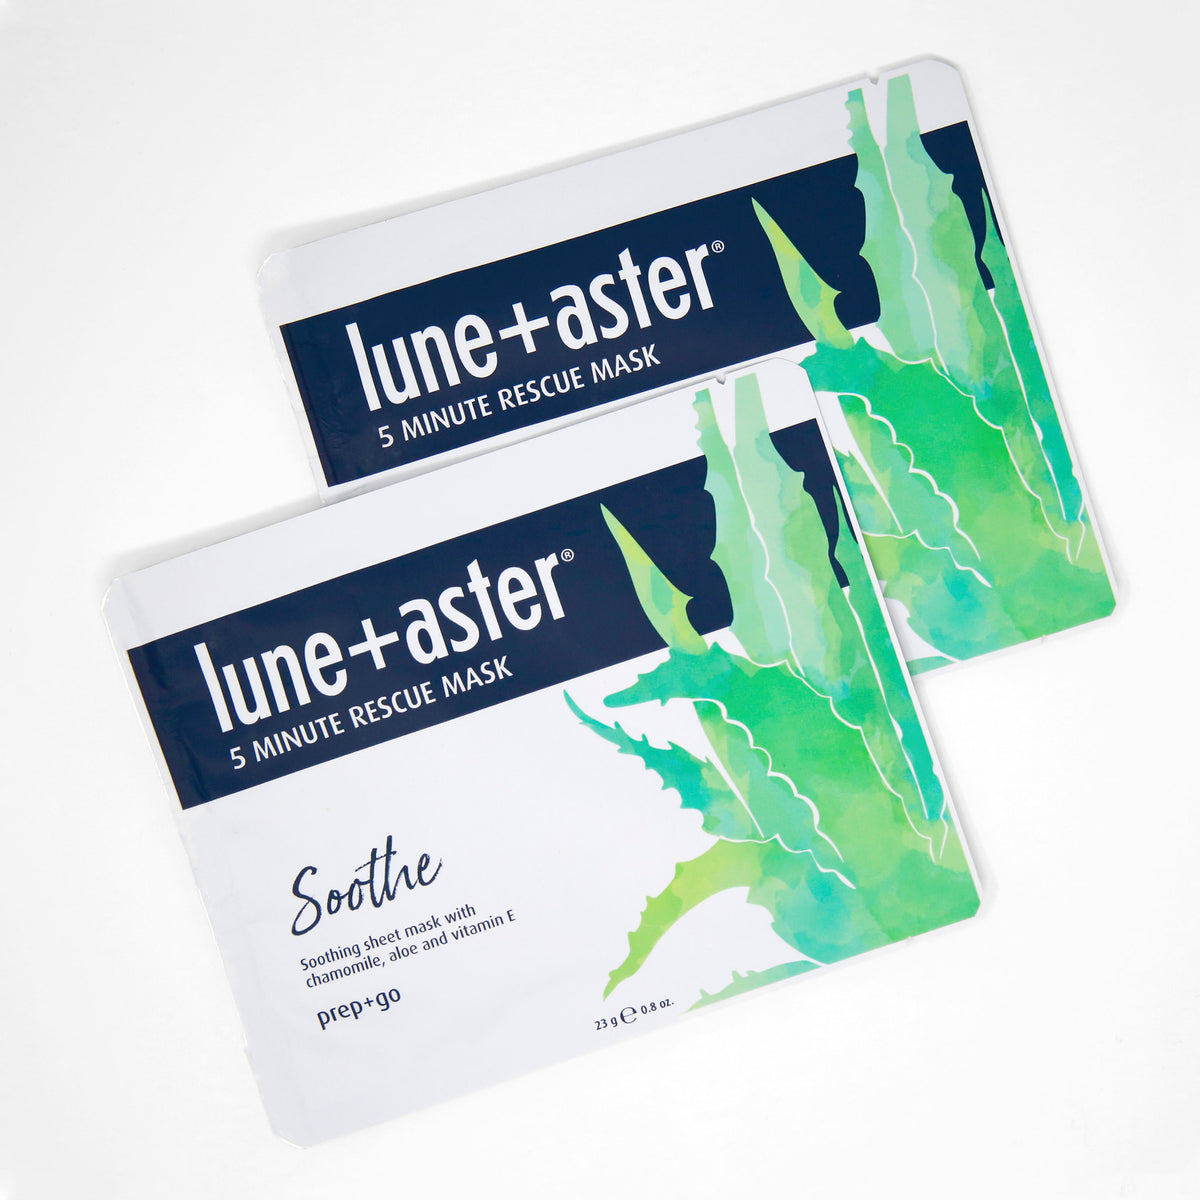 Lune+Aster 5 Minute Rescue Mask Soothe .